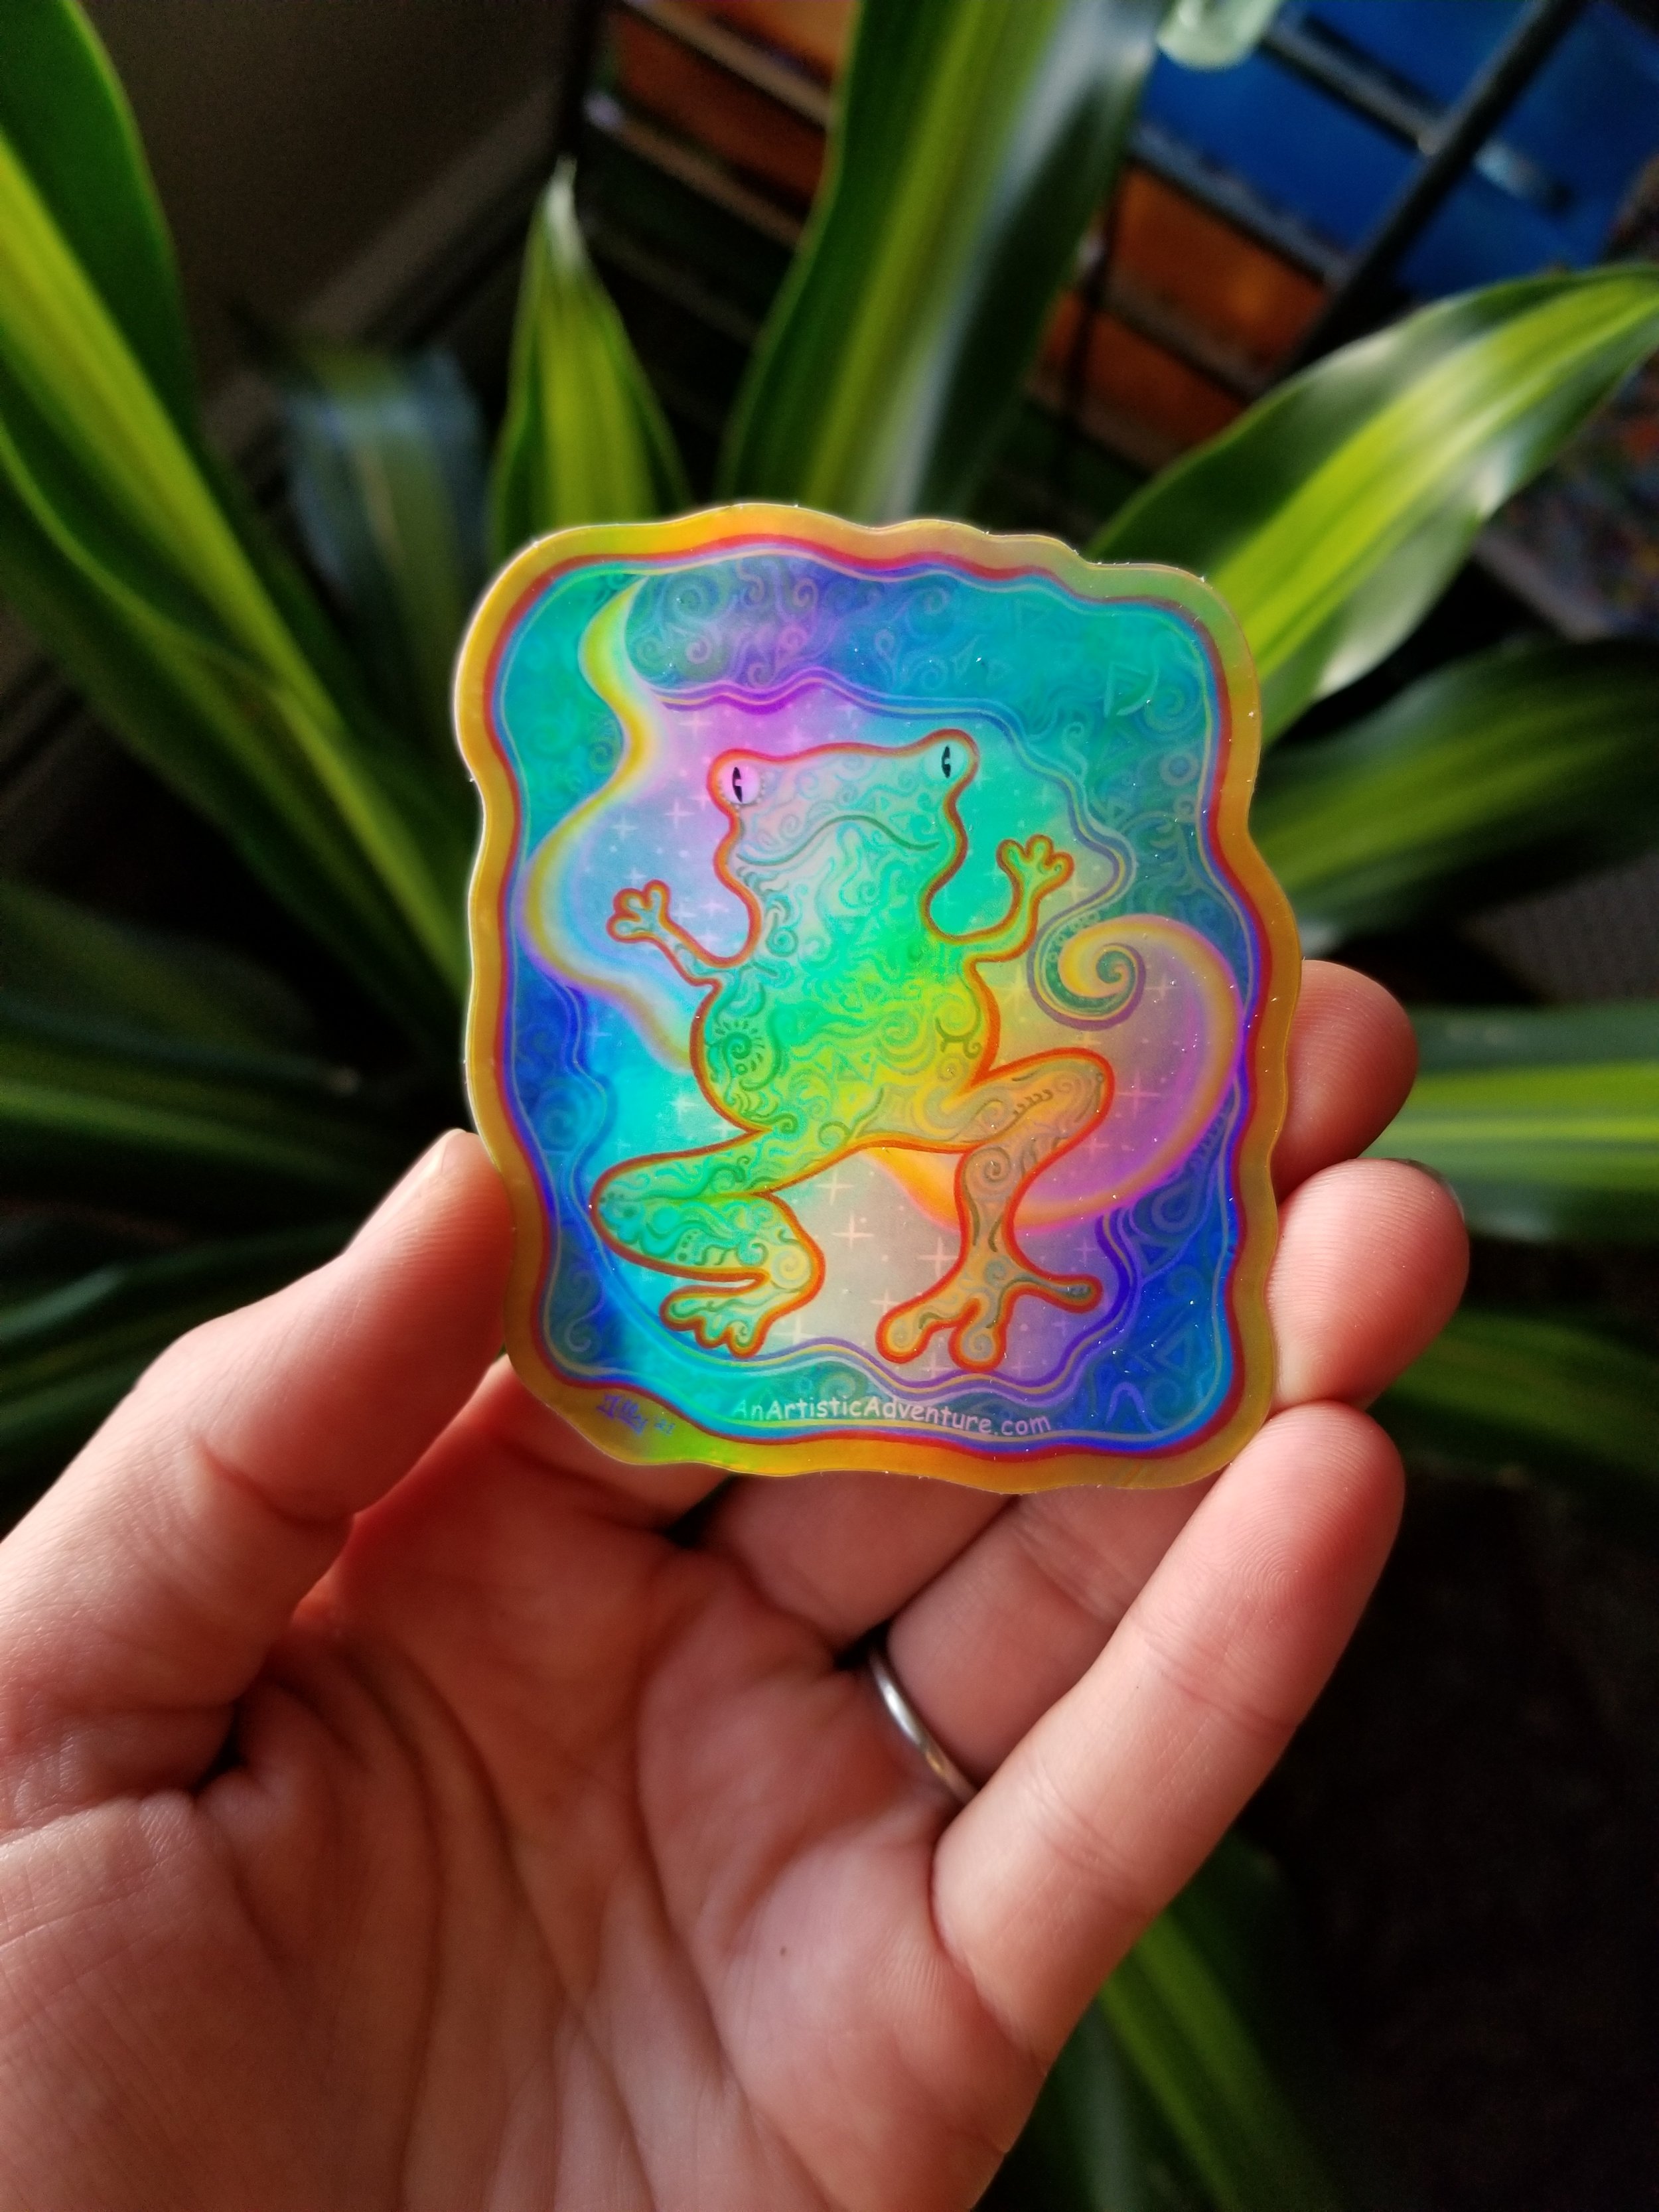 psychedelic-rainbow-frog-sticker-buy-stickers-from-independent-artists-unique-artisan-stickers.jpg